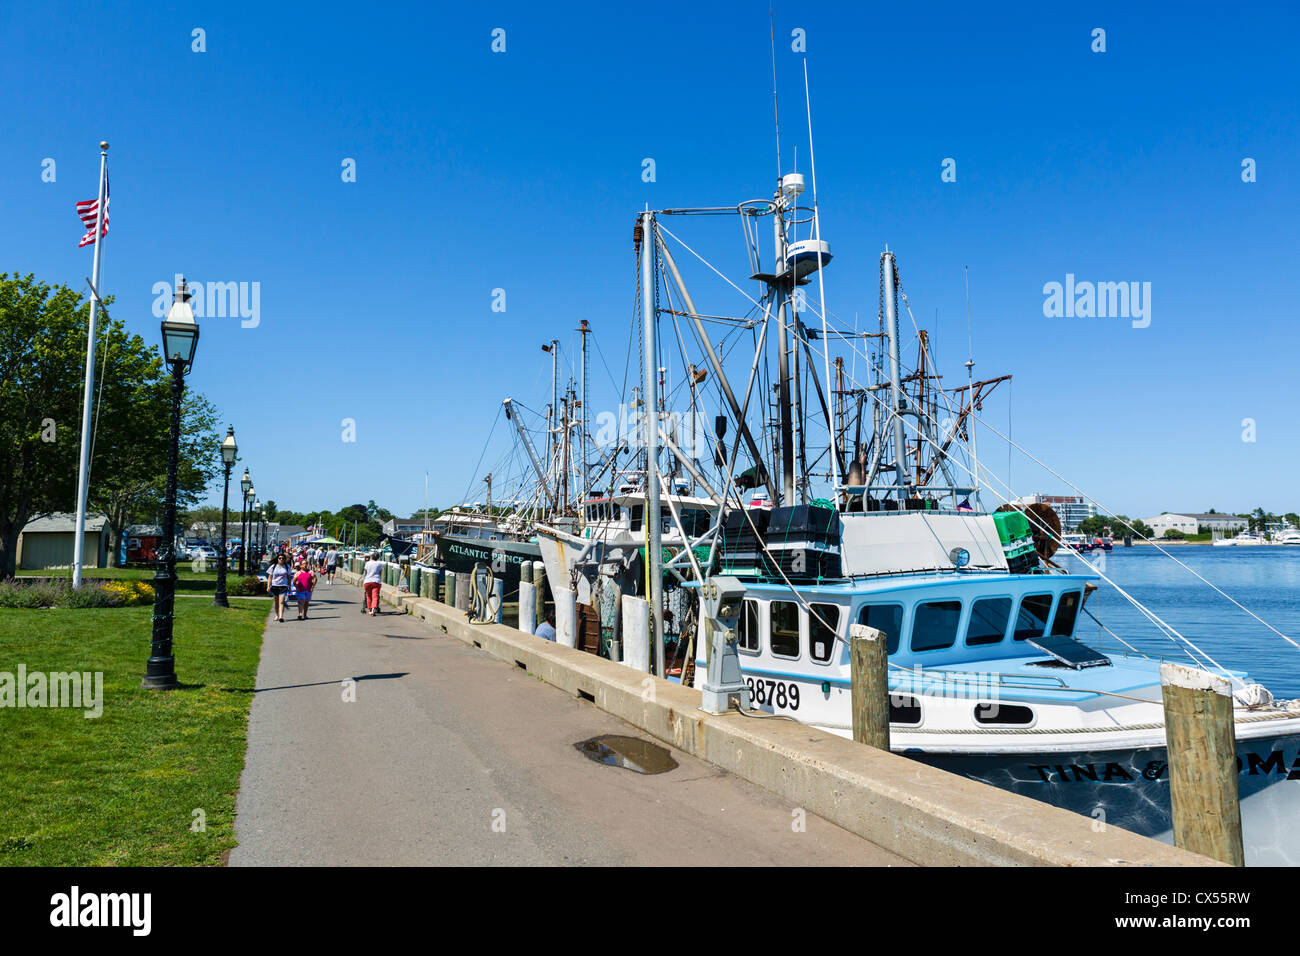 Boats in the harbor at Hyannis, Barnstable, Cape Cod, Massachusetts, USA Stock Photo